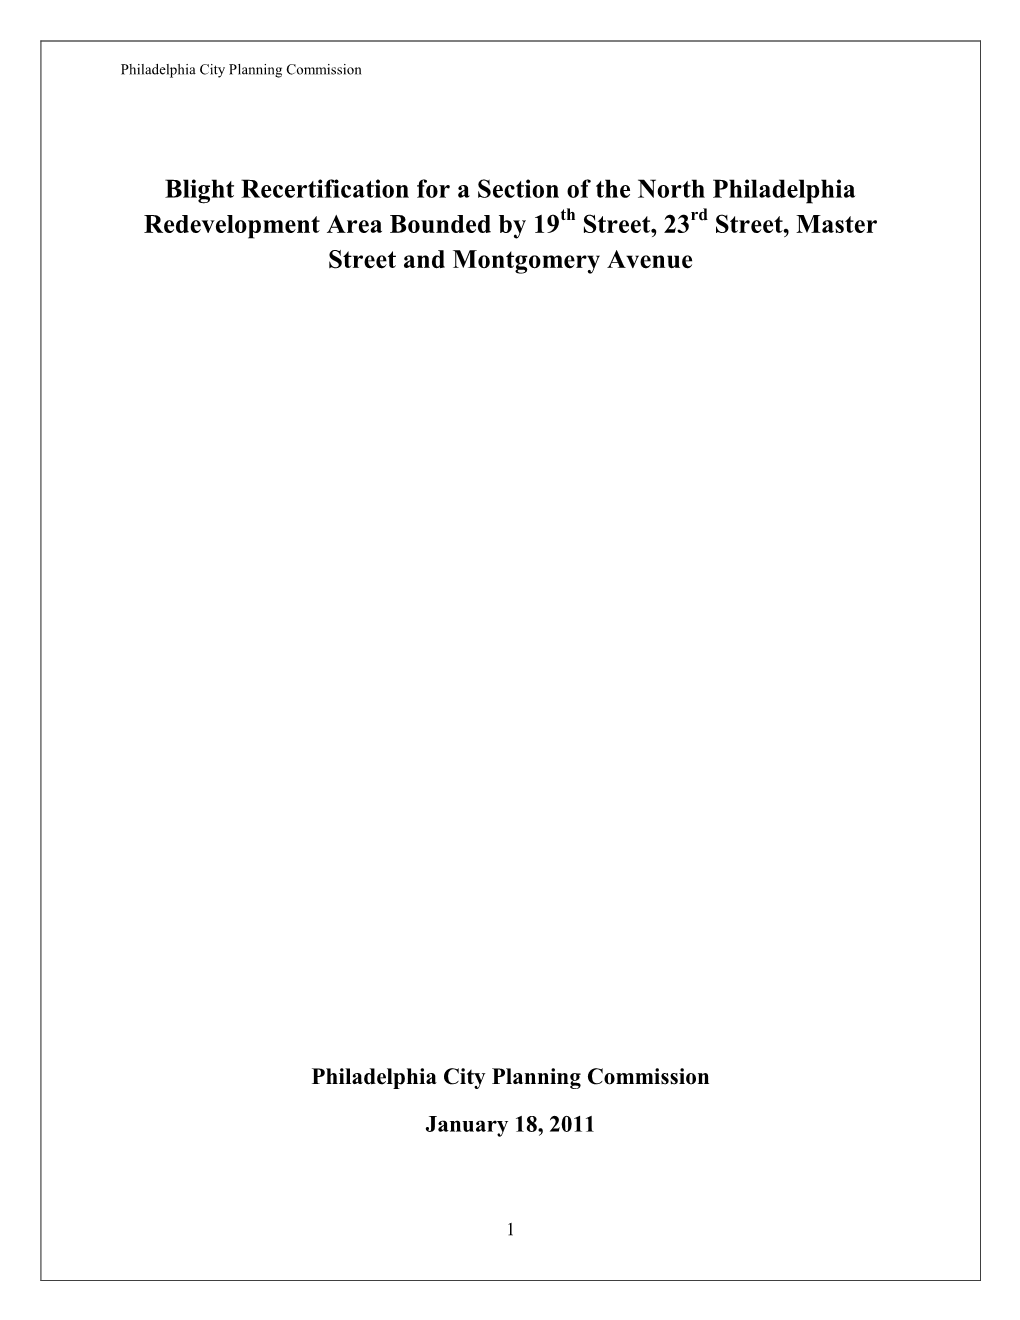 Blight Recertification for a Section of the North Philadelphia Redevelopment Area Bounded by 19Th Street, 23Rd Street, Master Street and Montgomery Avenue